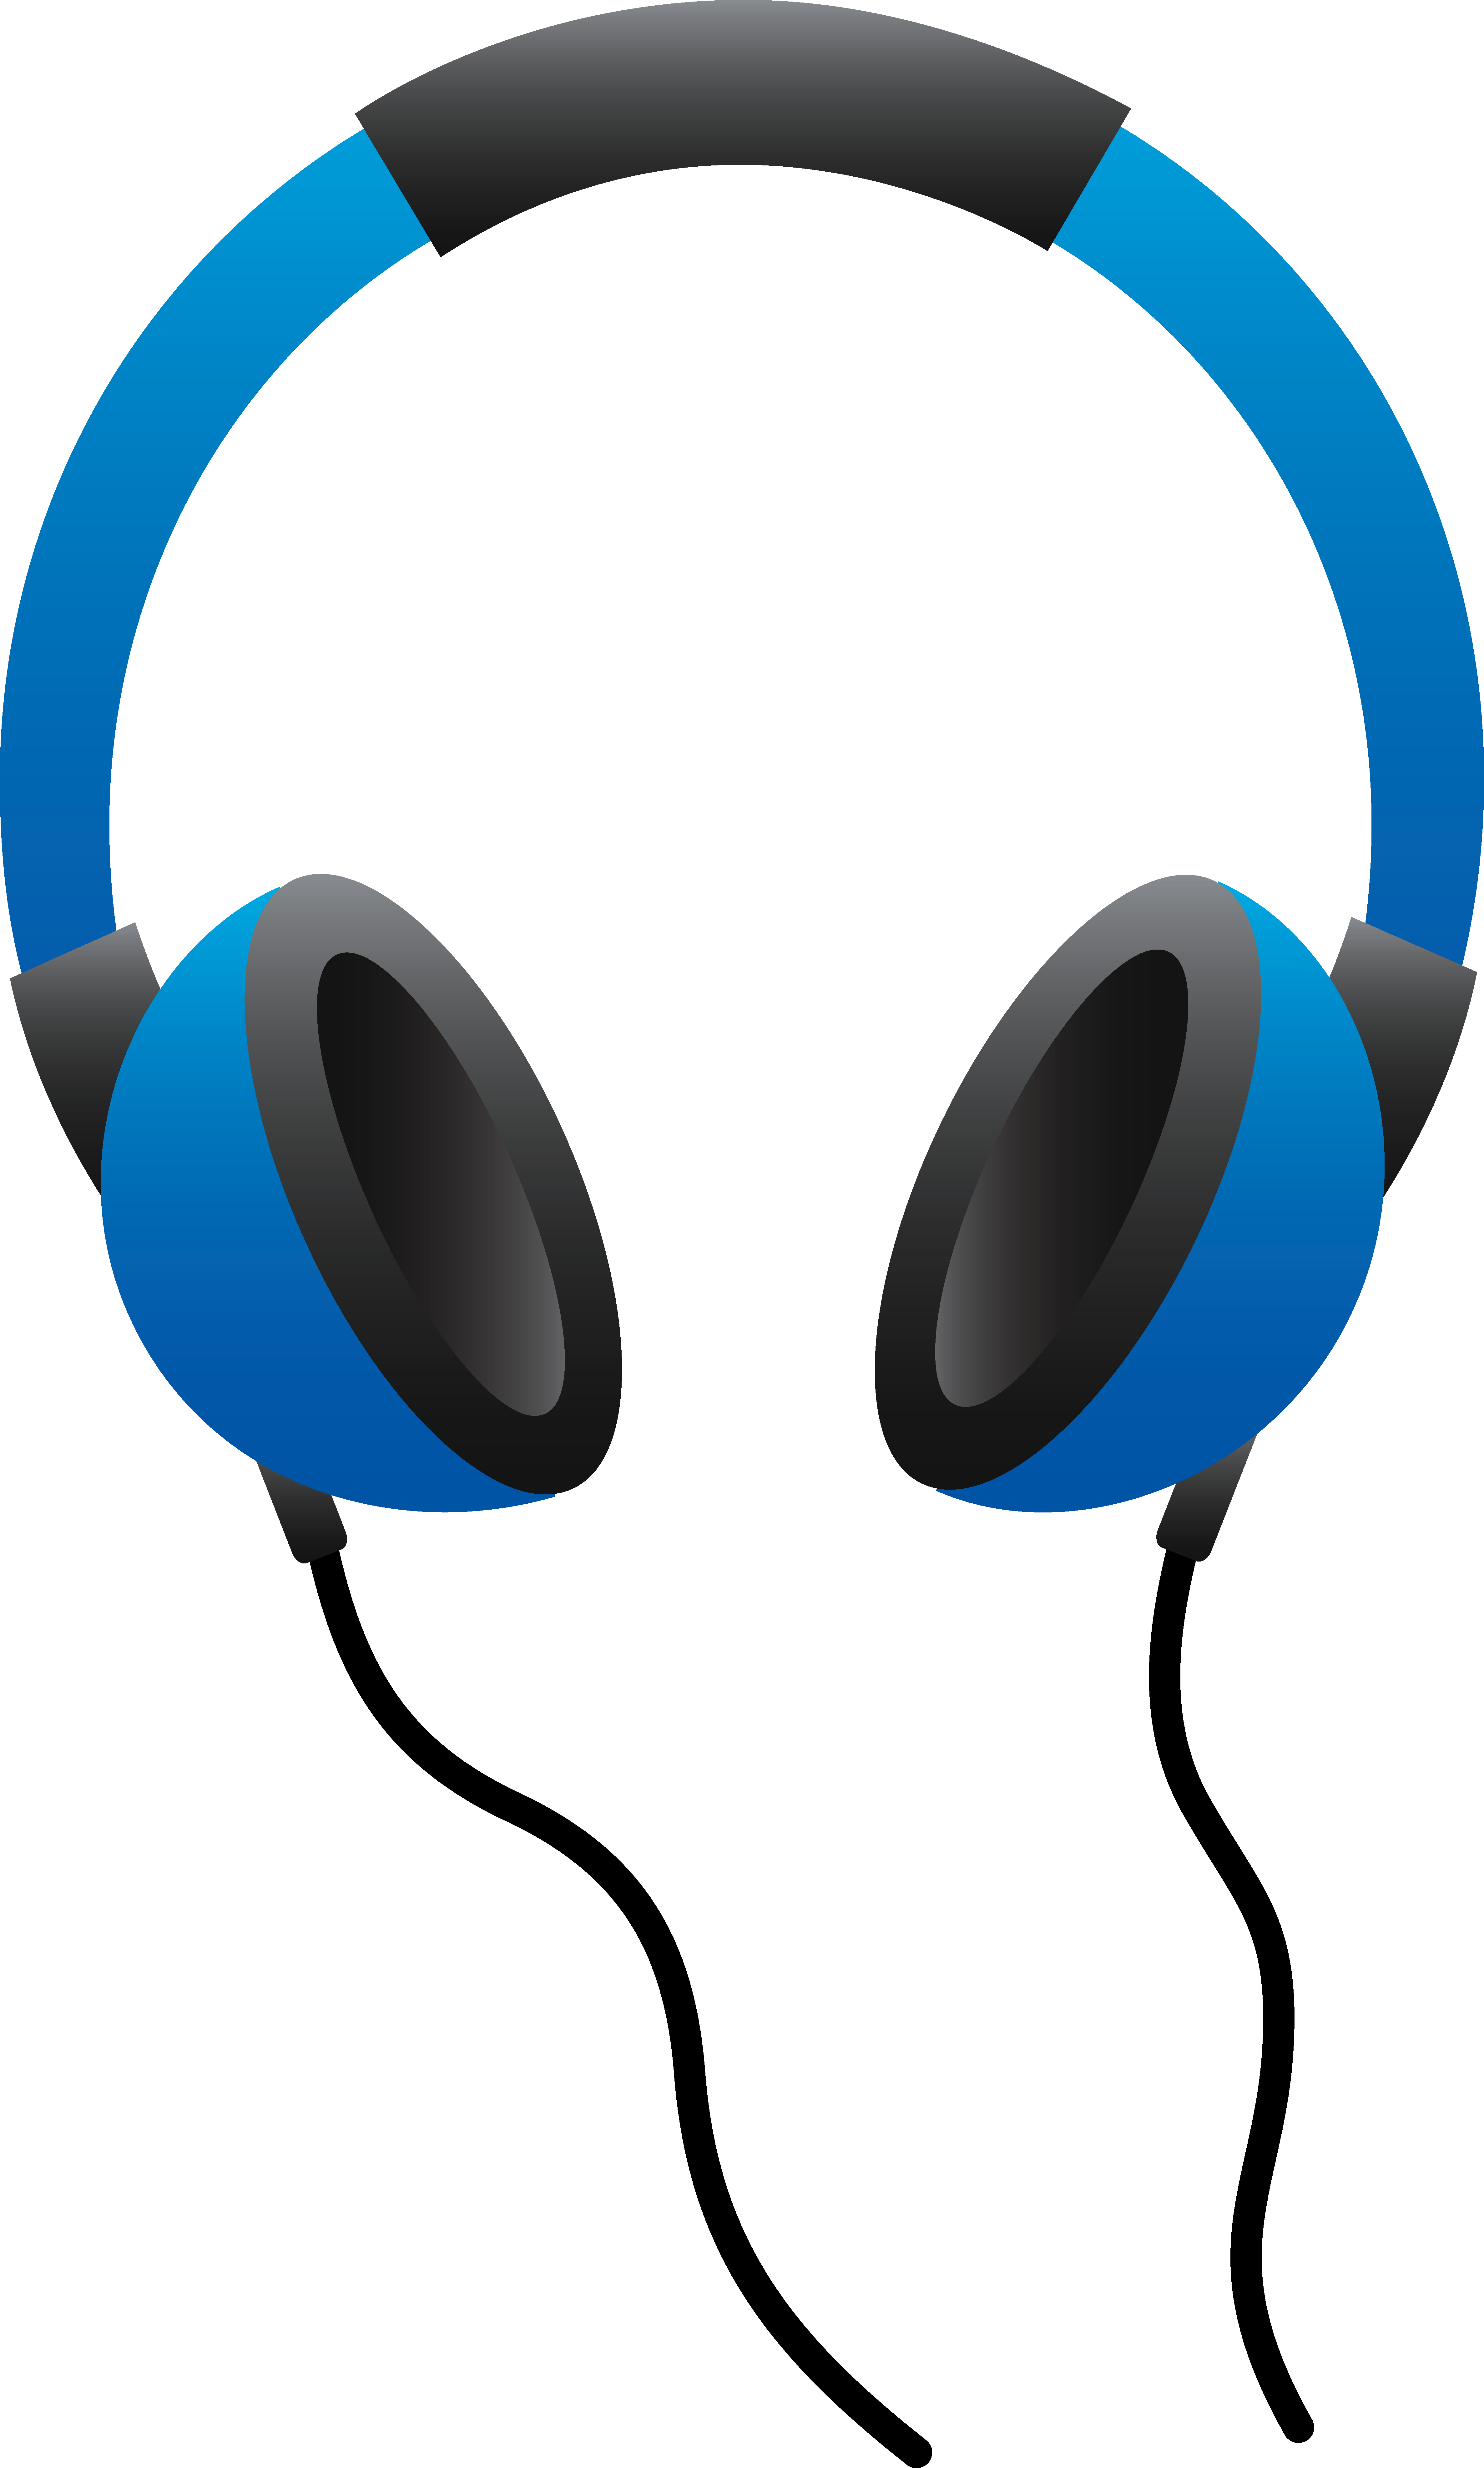 Headset Clipart - Free Clipart Images